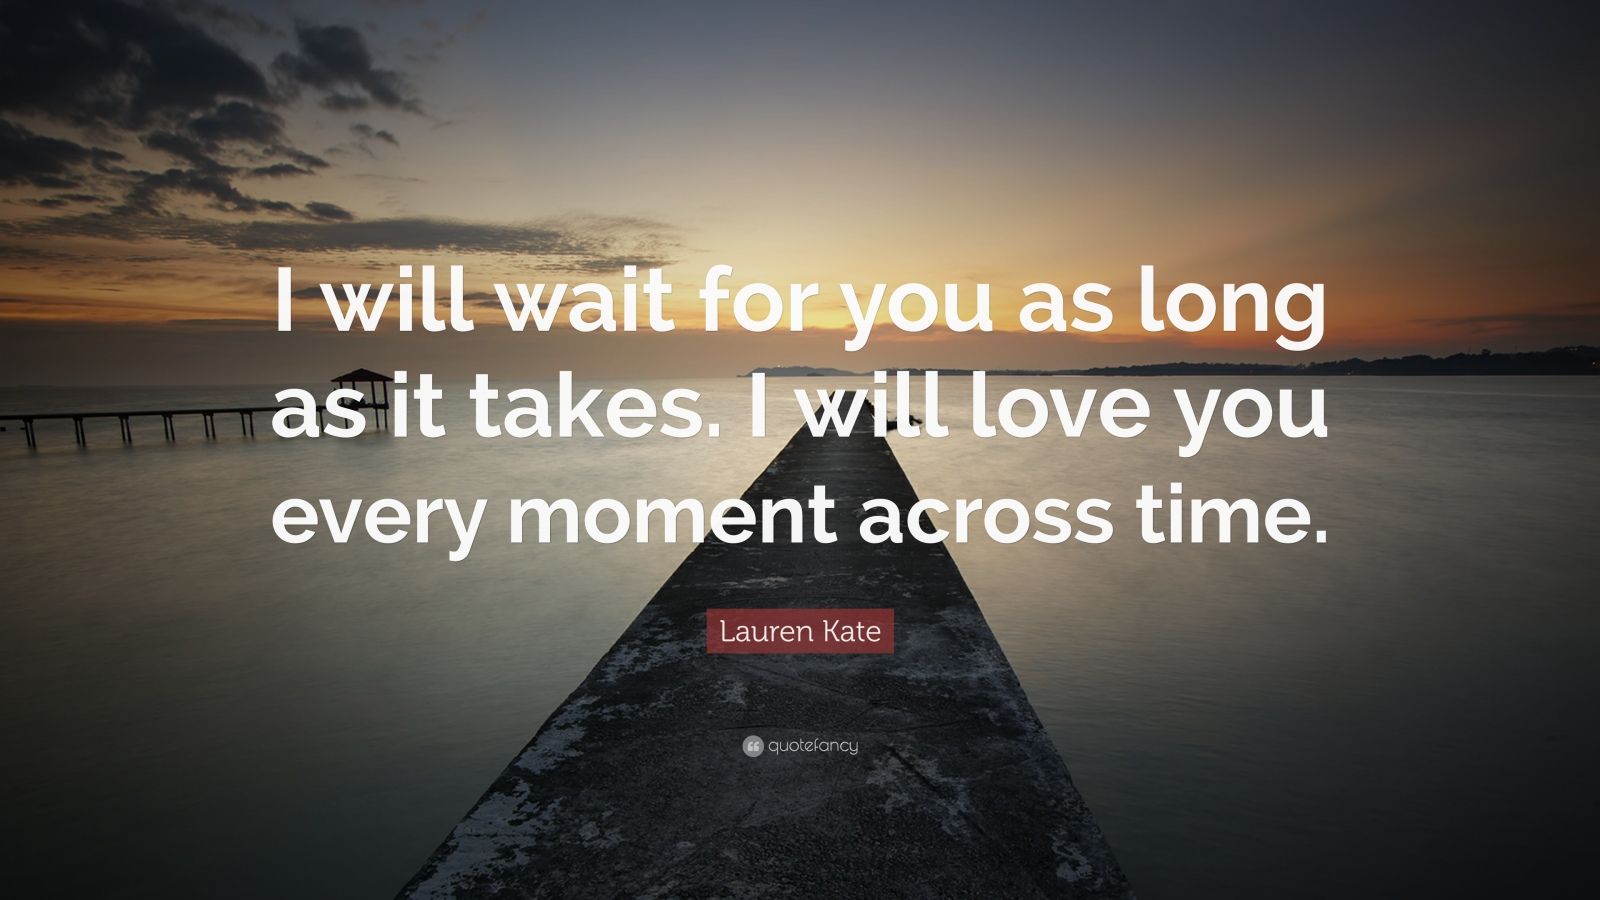 Lauren Kate Quote: “I Will Wait For You As Long As It Takes. I Will Love You Every Moment Across Time.”